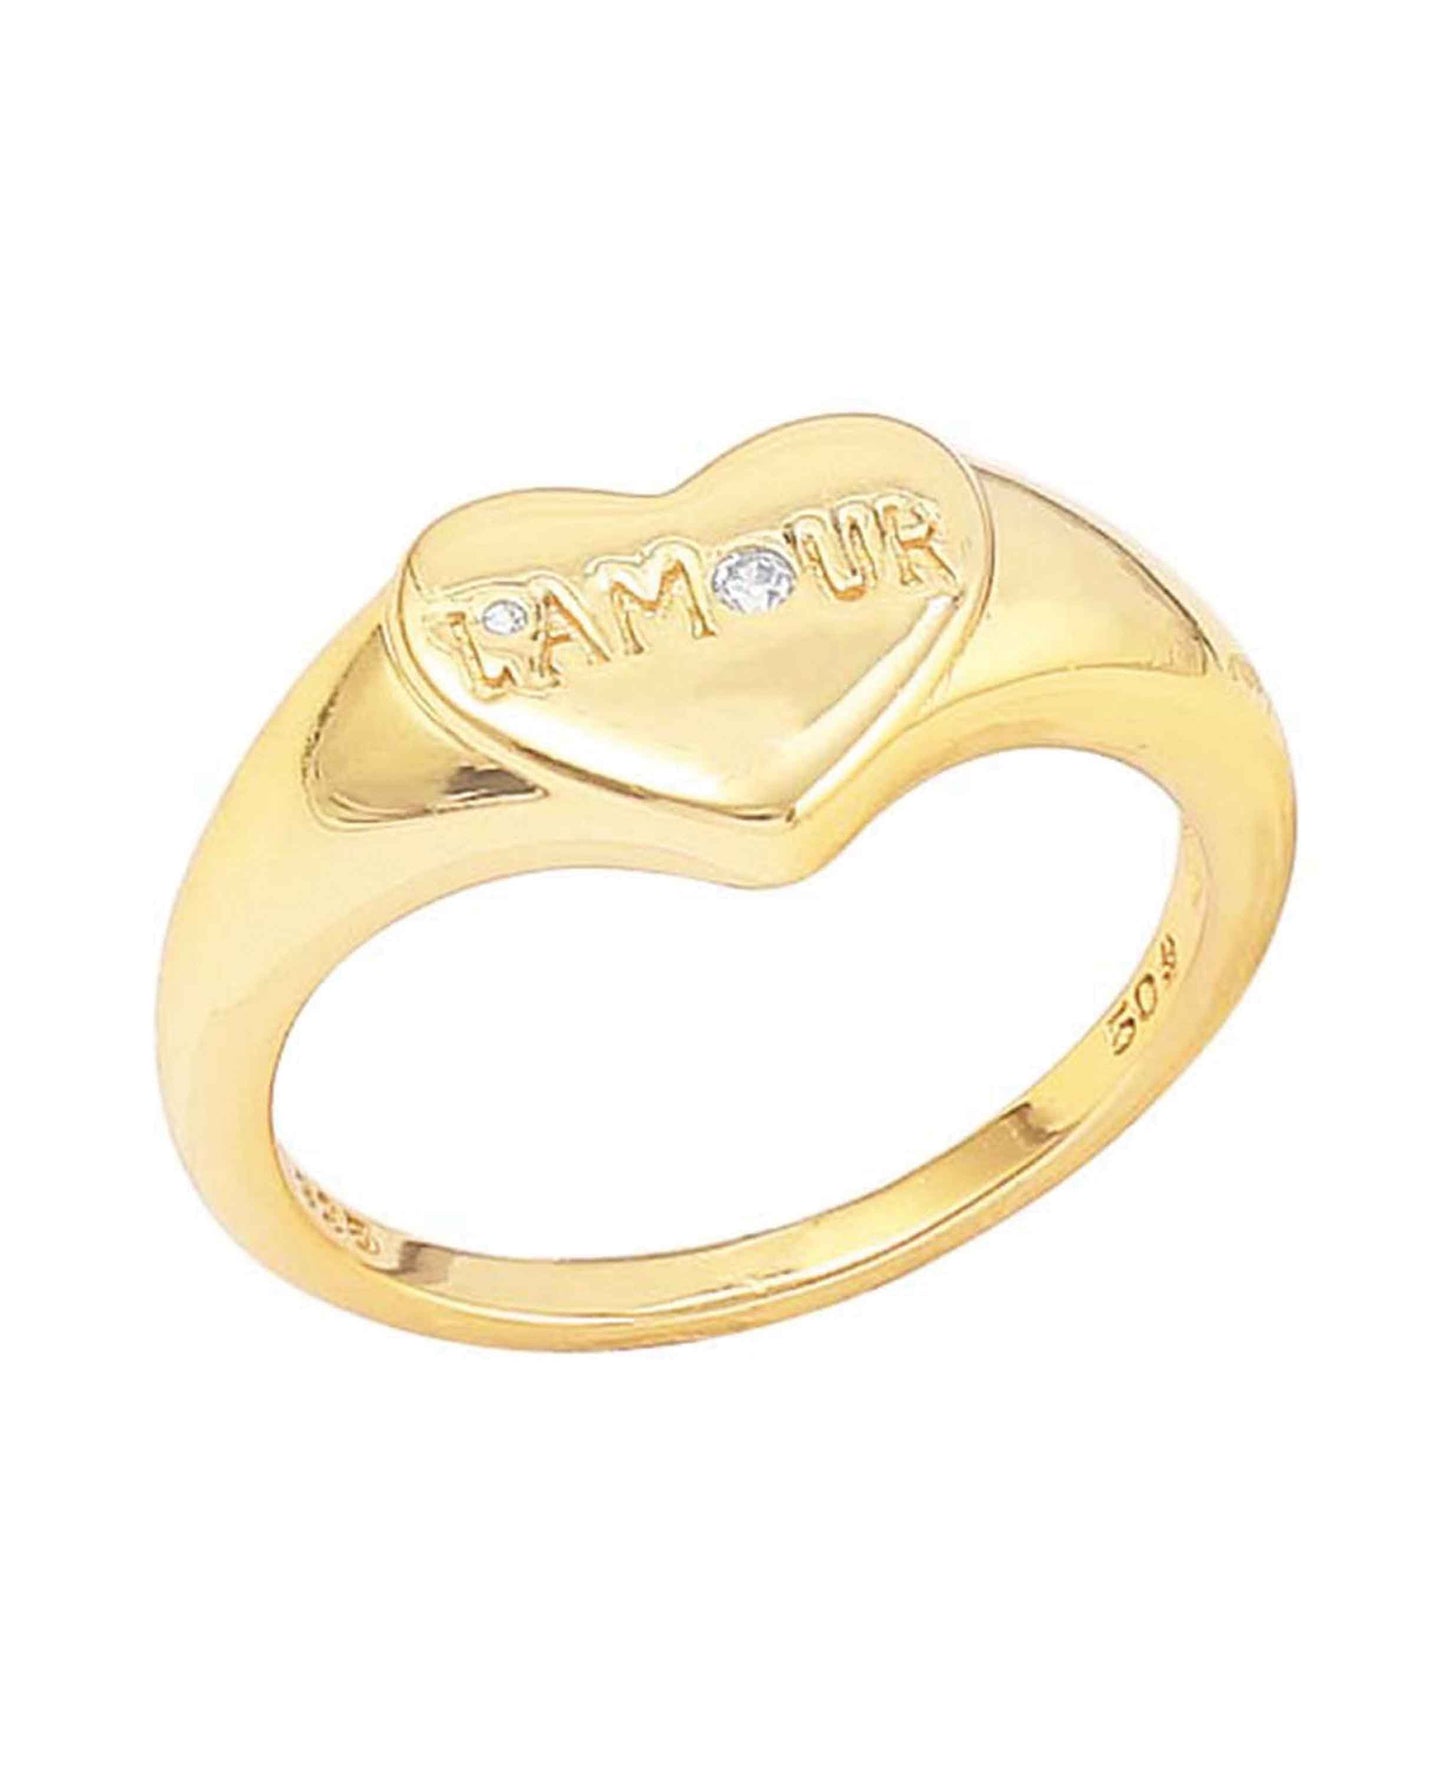 L'amour ring